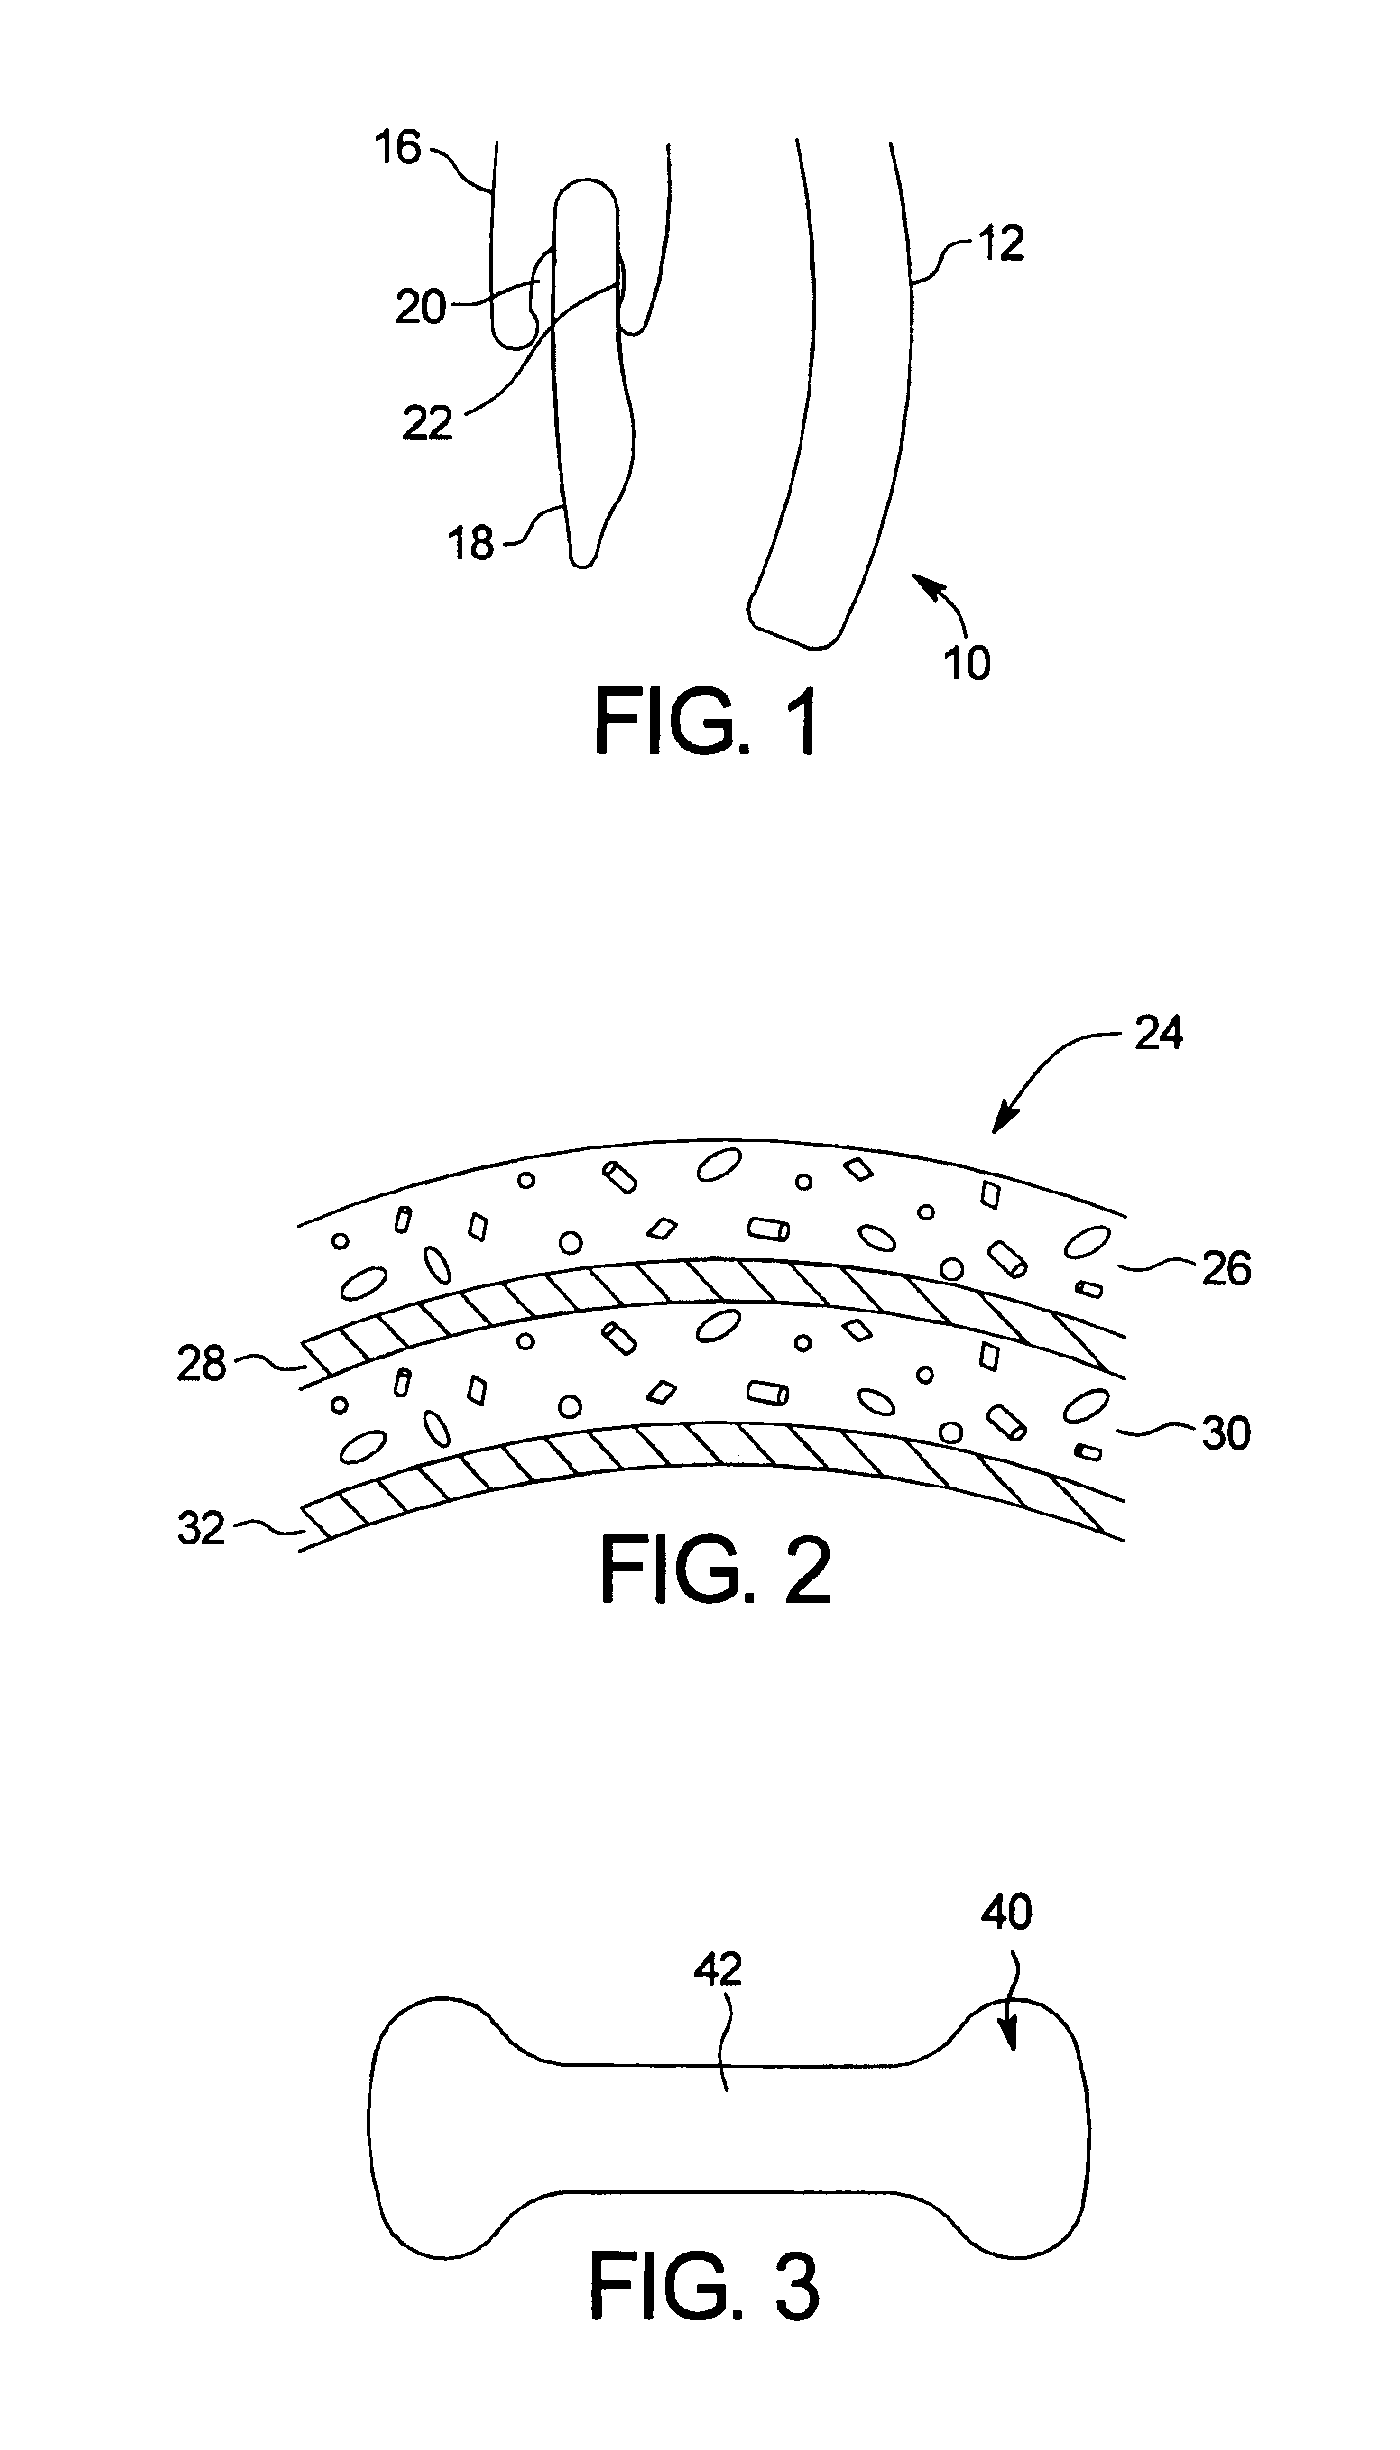 Products and methods for improving animal dental hygiene